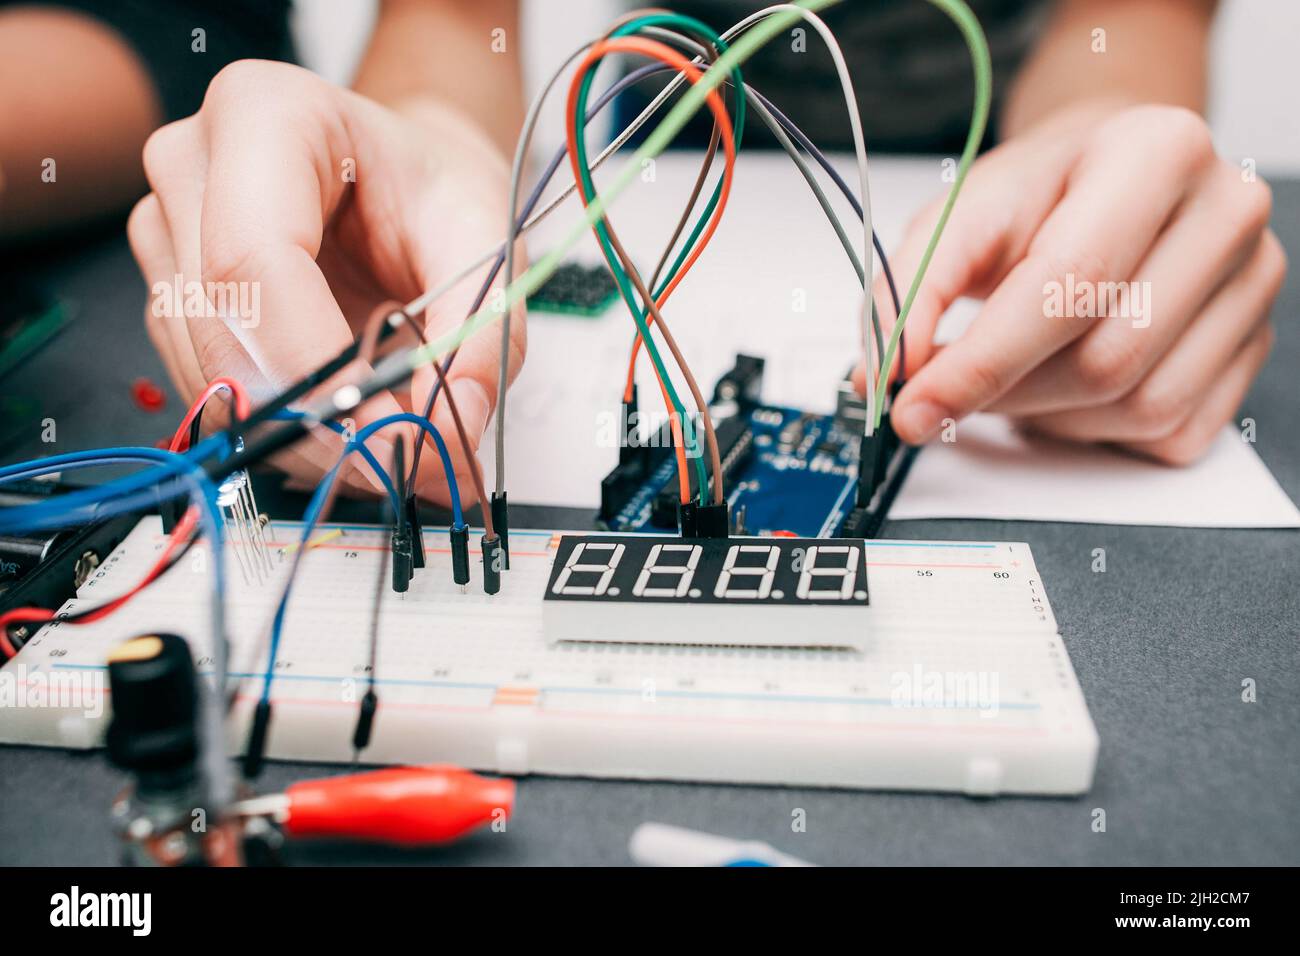 Breadboard with cables close-up Stock Photo